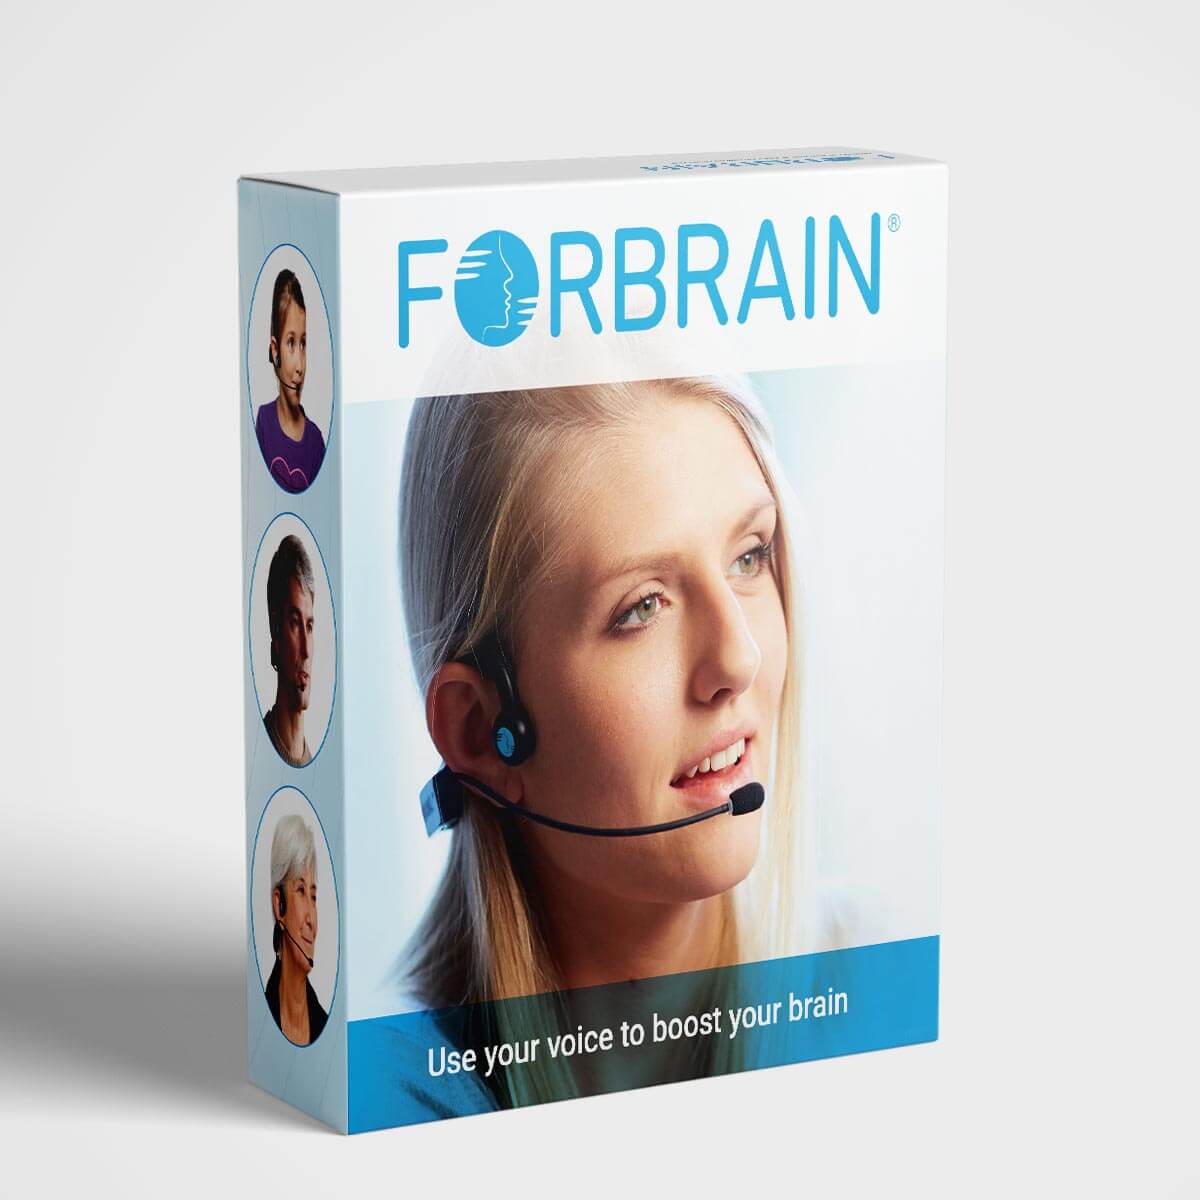 FORBRAIN® is a revolutionary brain training headset empowering people with speech, language, and attention challenges.